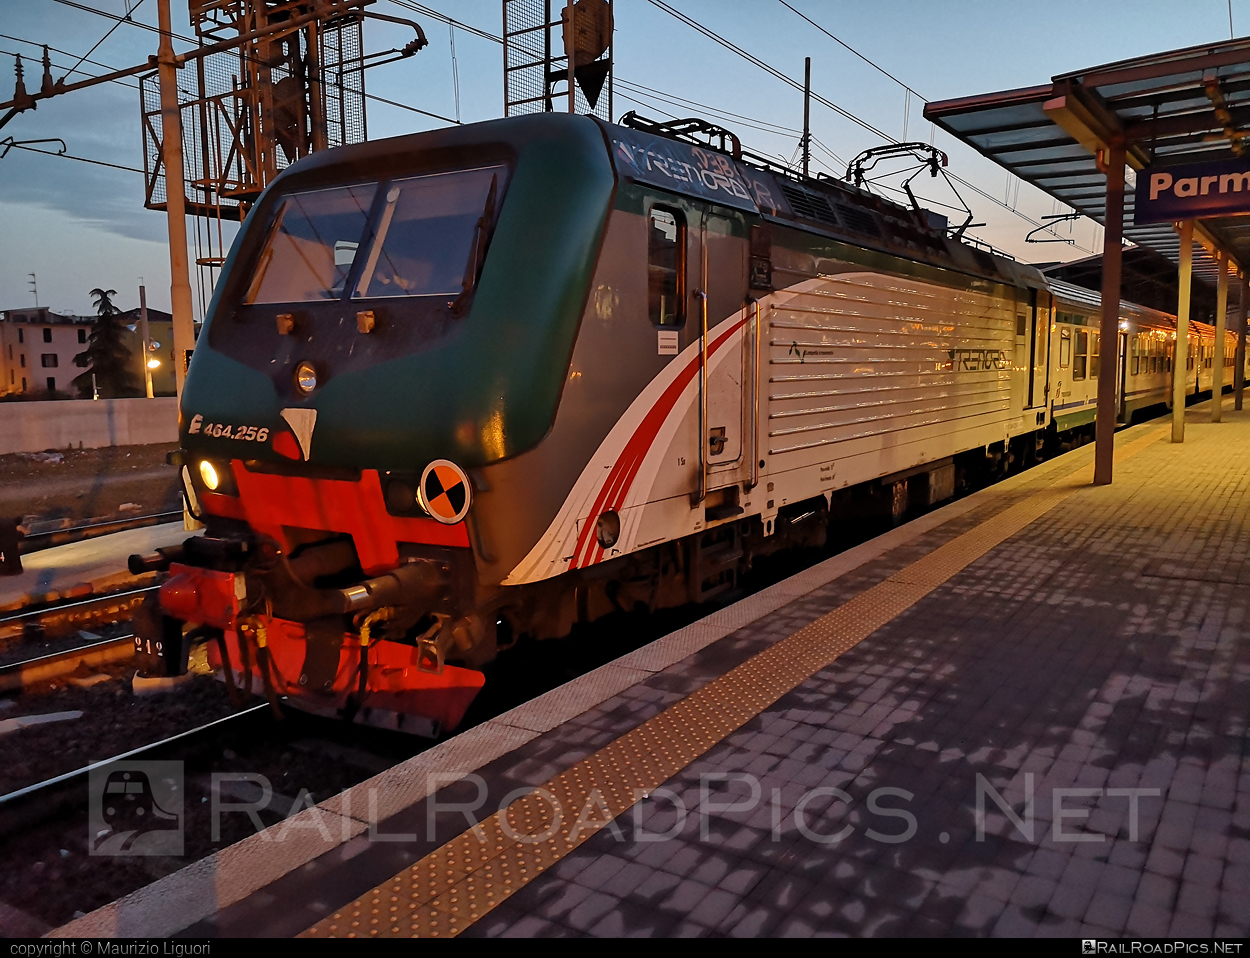 Bombardier TRAXX P160 DCP - E 464.256 operated by TRENORD #bombardier #bombardiertraxx #lavatrice #traxx #traxxp160 #traxxp160dcp #trenord